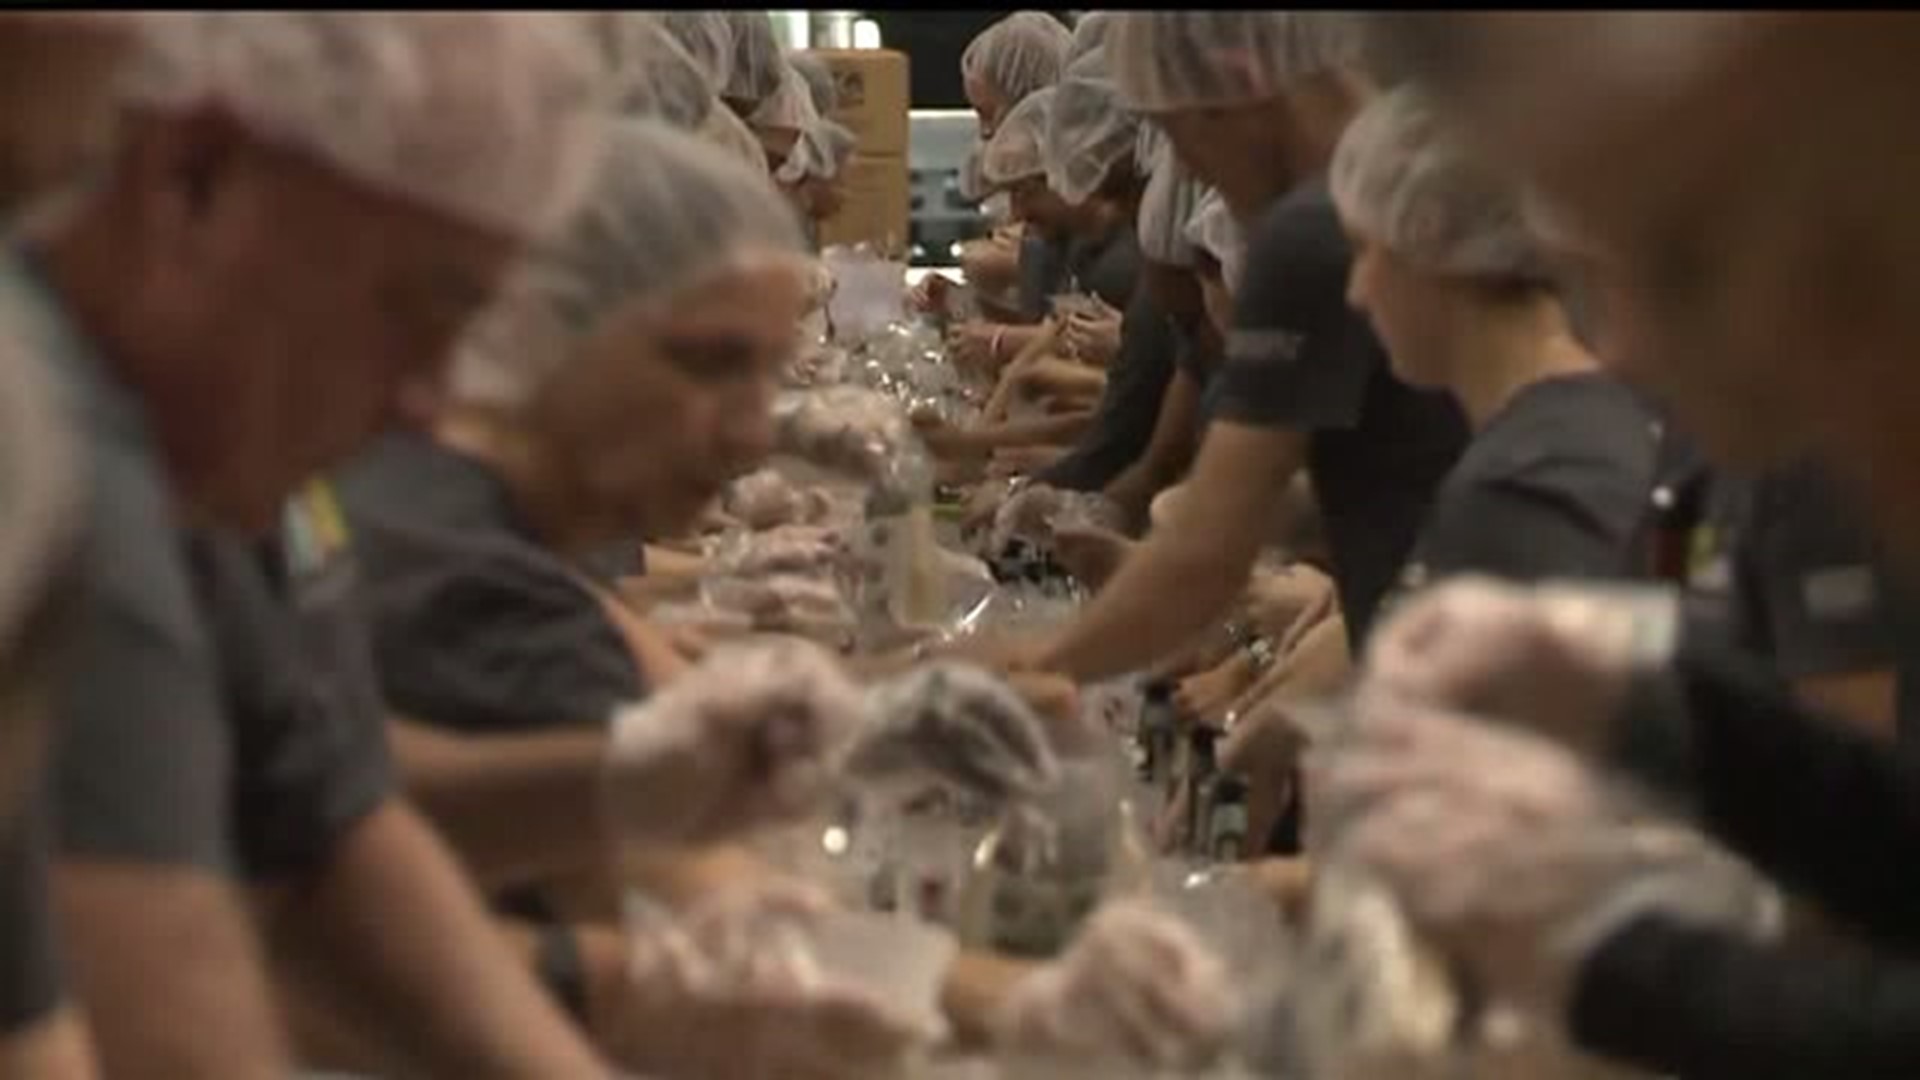 Thousands of meals to be sent from Hershey to kids in need